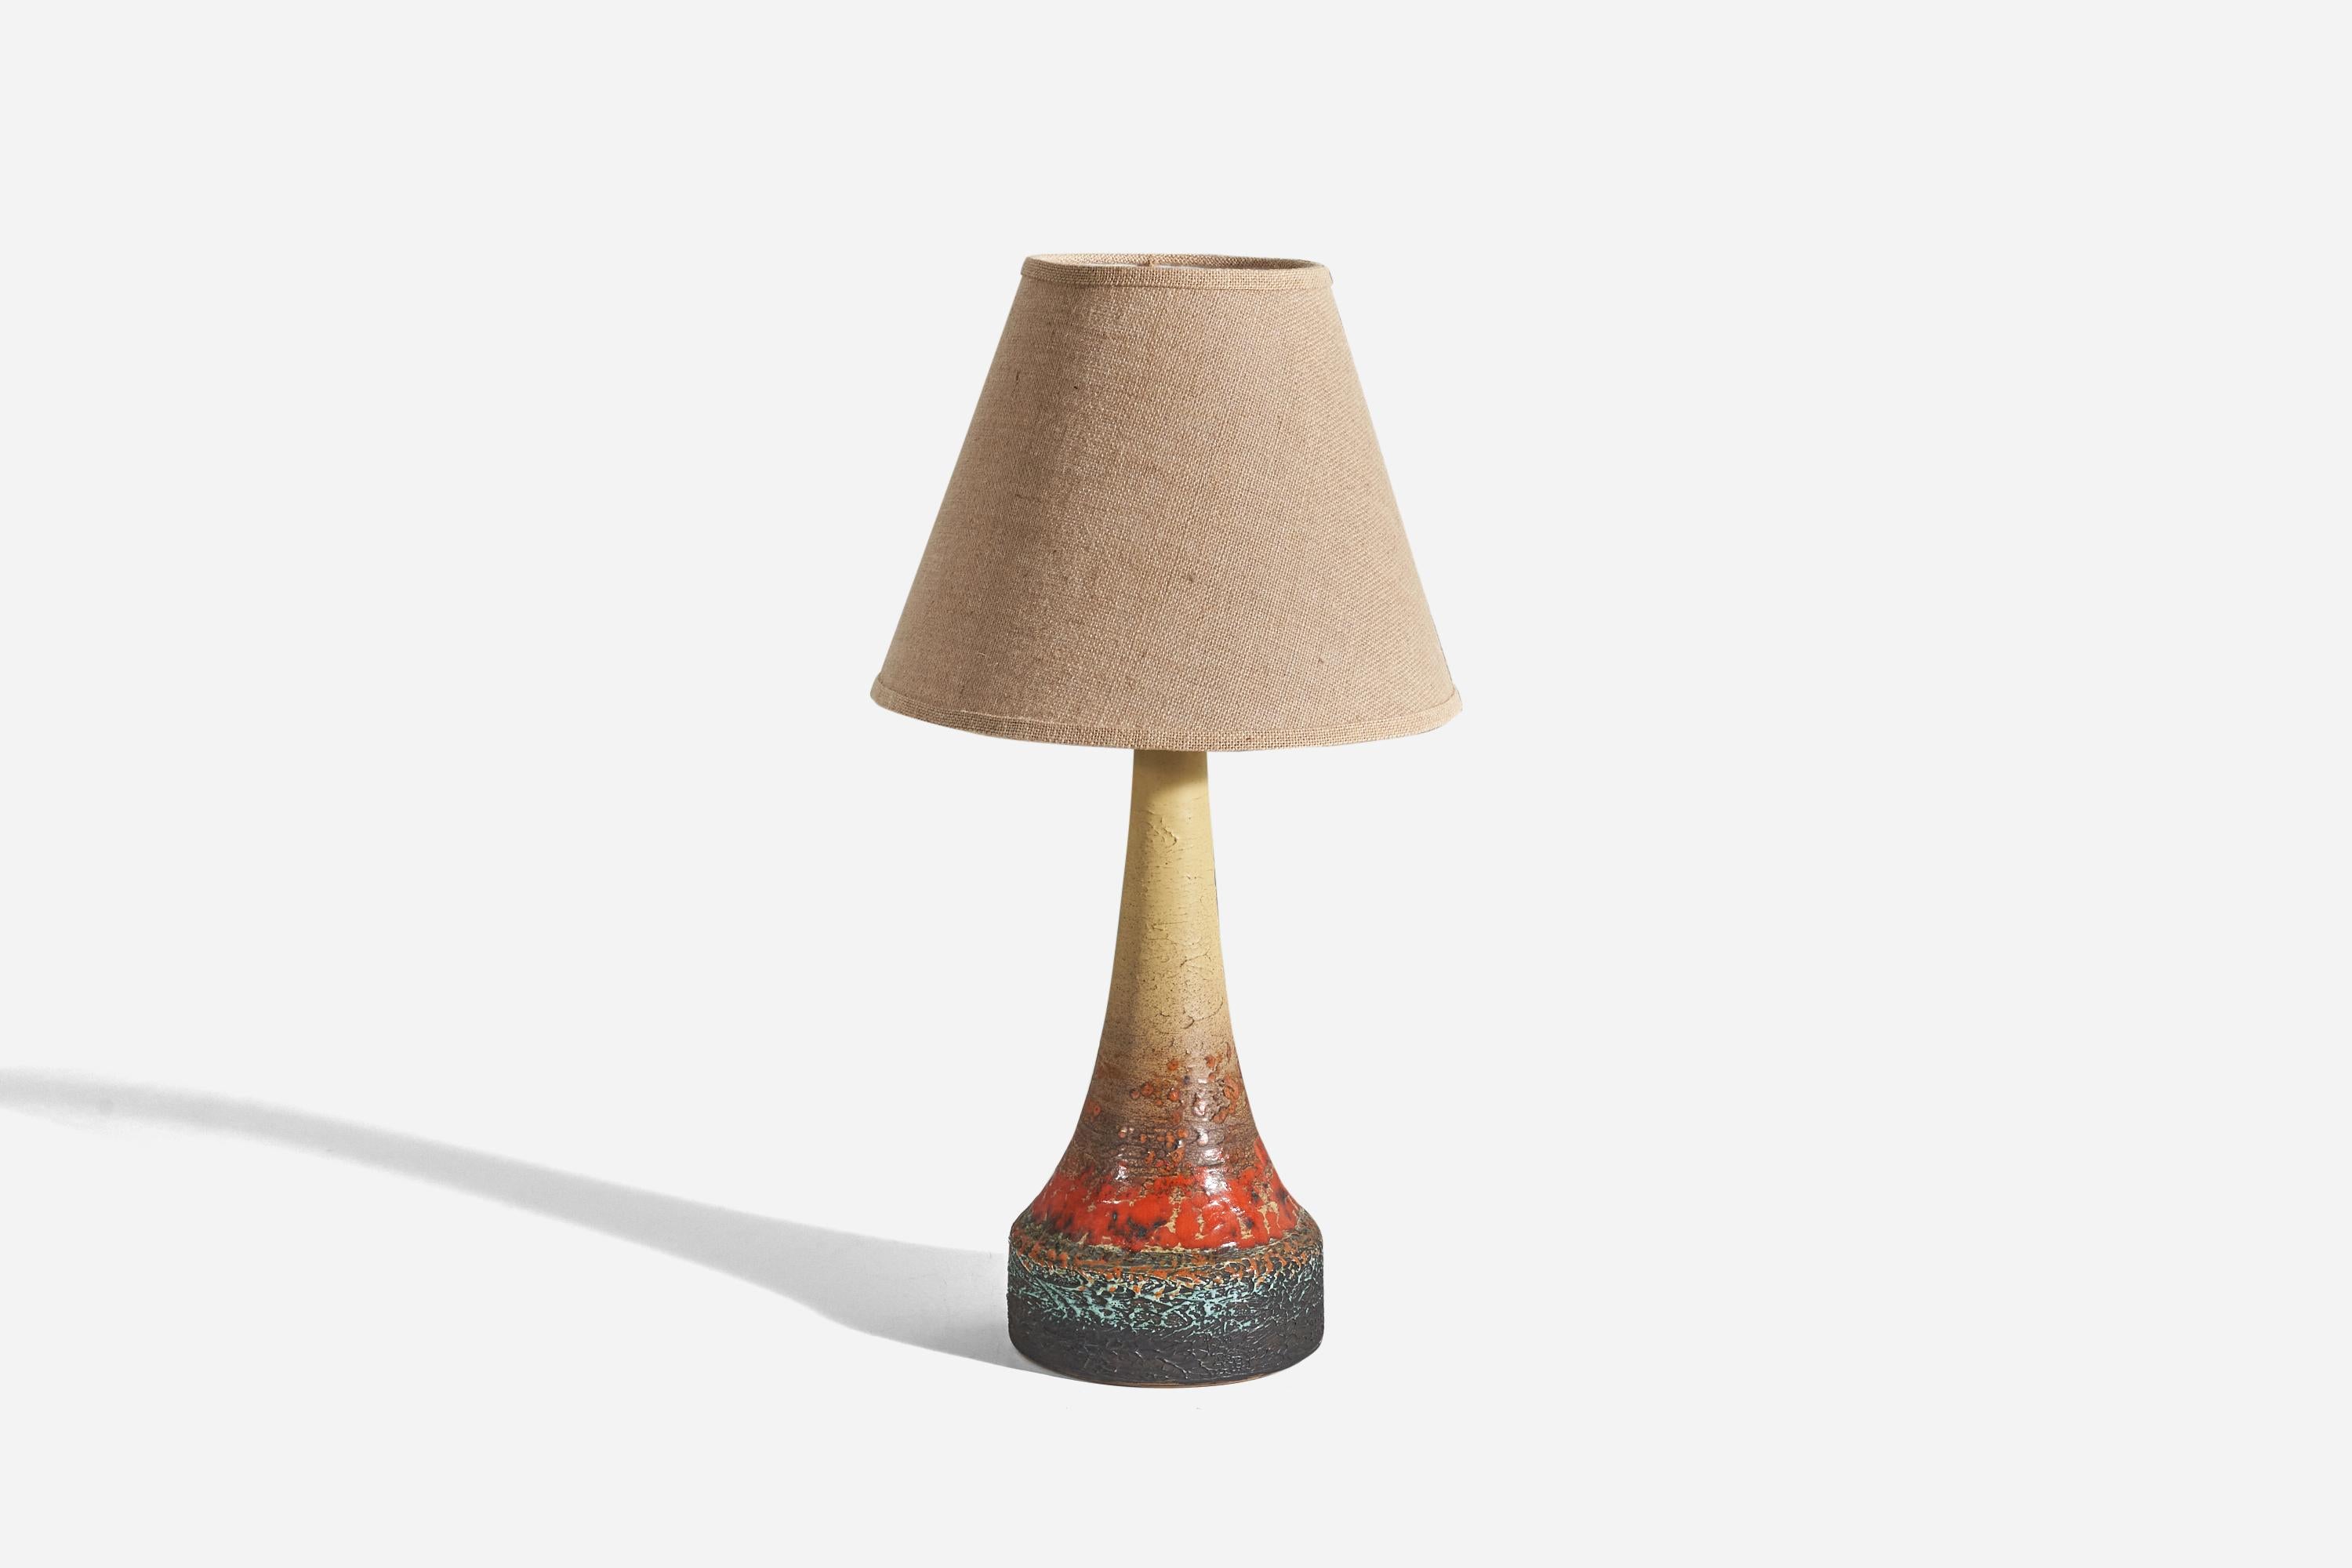 A sizeable glazed stoneware table lamp designed and produced by Tilgmans Keramik, Sweden, 1960s. 

Sold without lampshade. 
Dimensions of lamp (inches) : 19.62 x 7.75 x 7.75 (Height x Width x Depth)
Dimensions of shade (inches) : 7 x 14 x 11